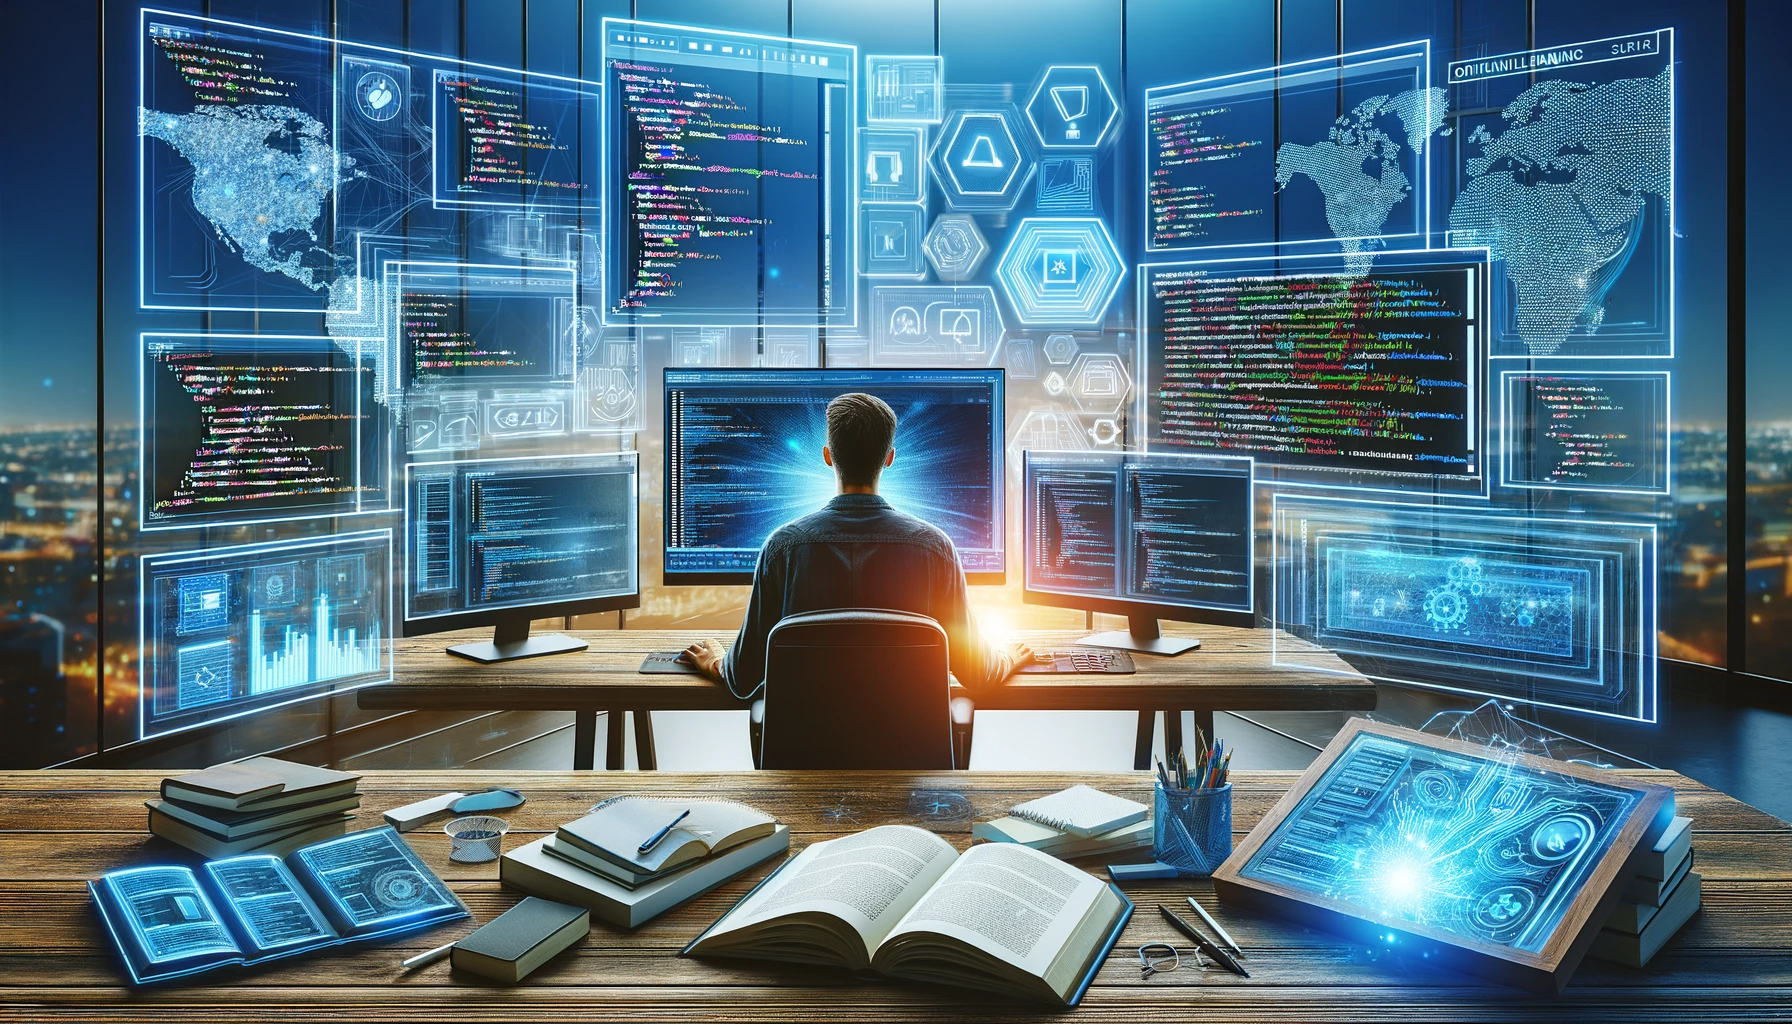 The image depicts an individual embarking on a career in Front-End Development, seated at a modern workspace. The workspace is equipped with multiple computer screens, each displaying web development code, symbolizing proficiency in HTML, CSS, and JavaScript. Elements like open books and digital graphs are included, representing the importance of continuous learning and staying updated with industry trends. The setting is dynamic and tech-oriented, reflecting the innovative and evolving nature of the web development field.